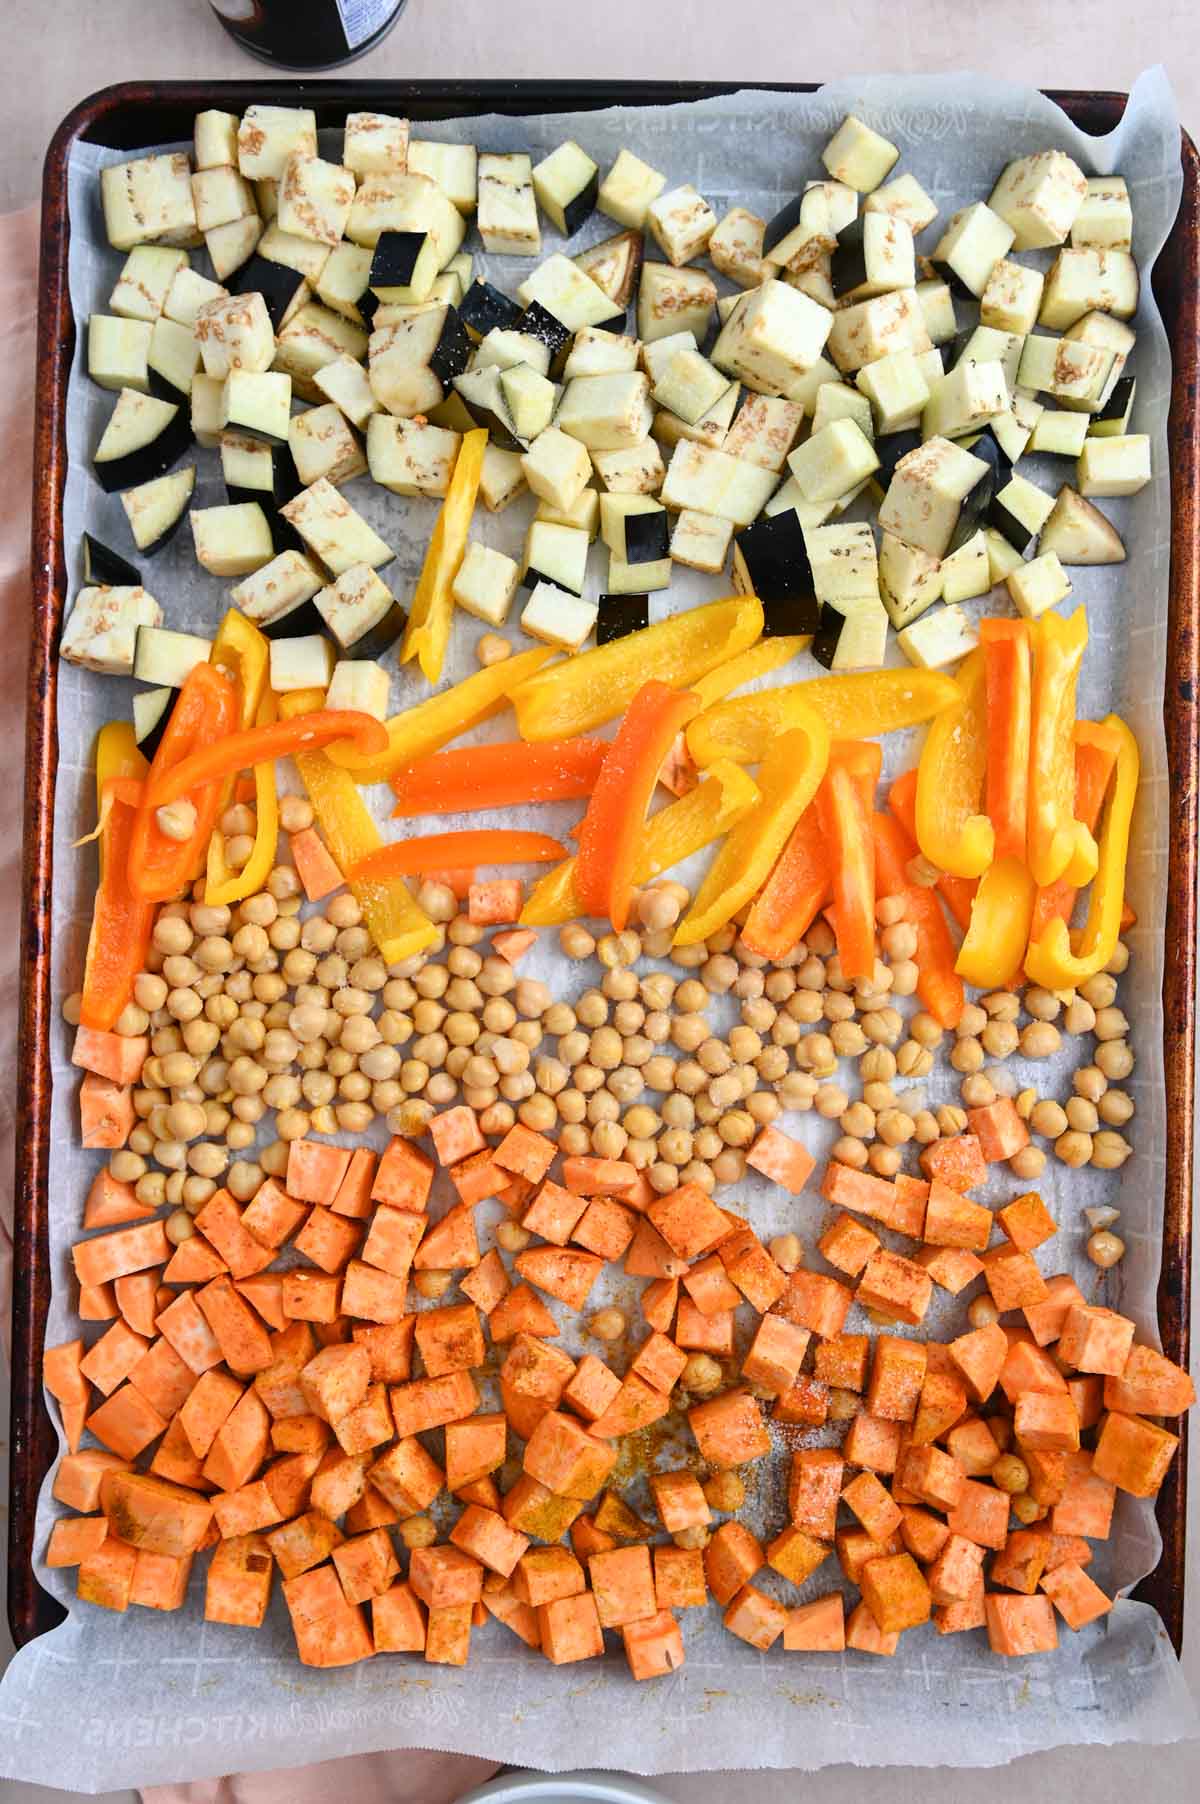 Bell pepper, eggplant, chickpeas, and sweet potato on a sheet pan before roasting.